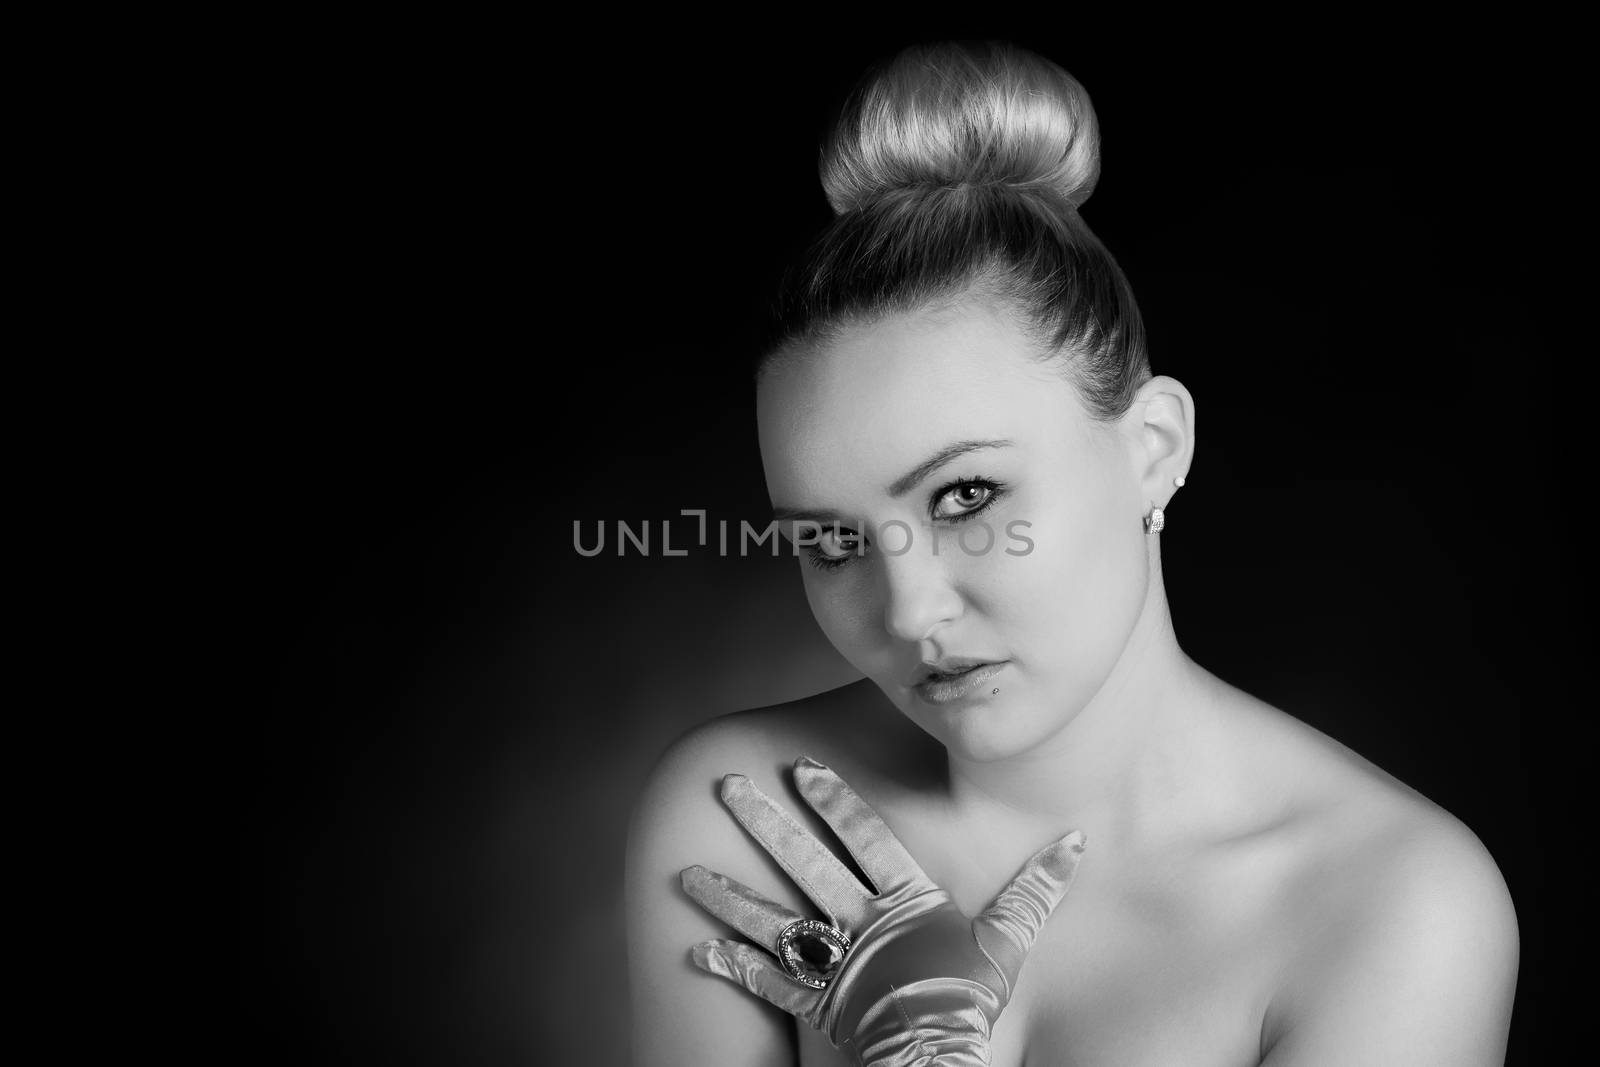 Beauty Fashion Glamour Girl Portrait. Girl Wearing Gloves. Jewellery. Jewelry. Glamor Hairstyle and Make-up. Diamond Ring. by 25ehaag6